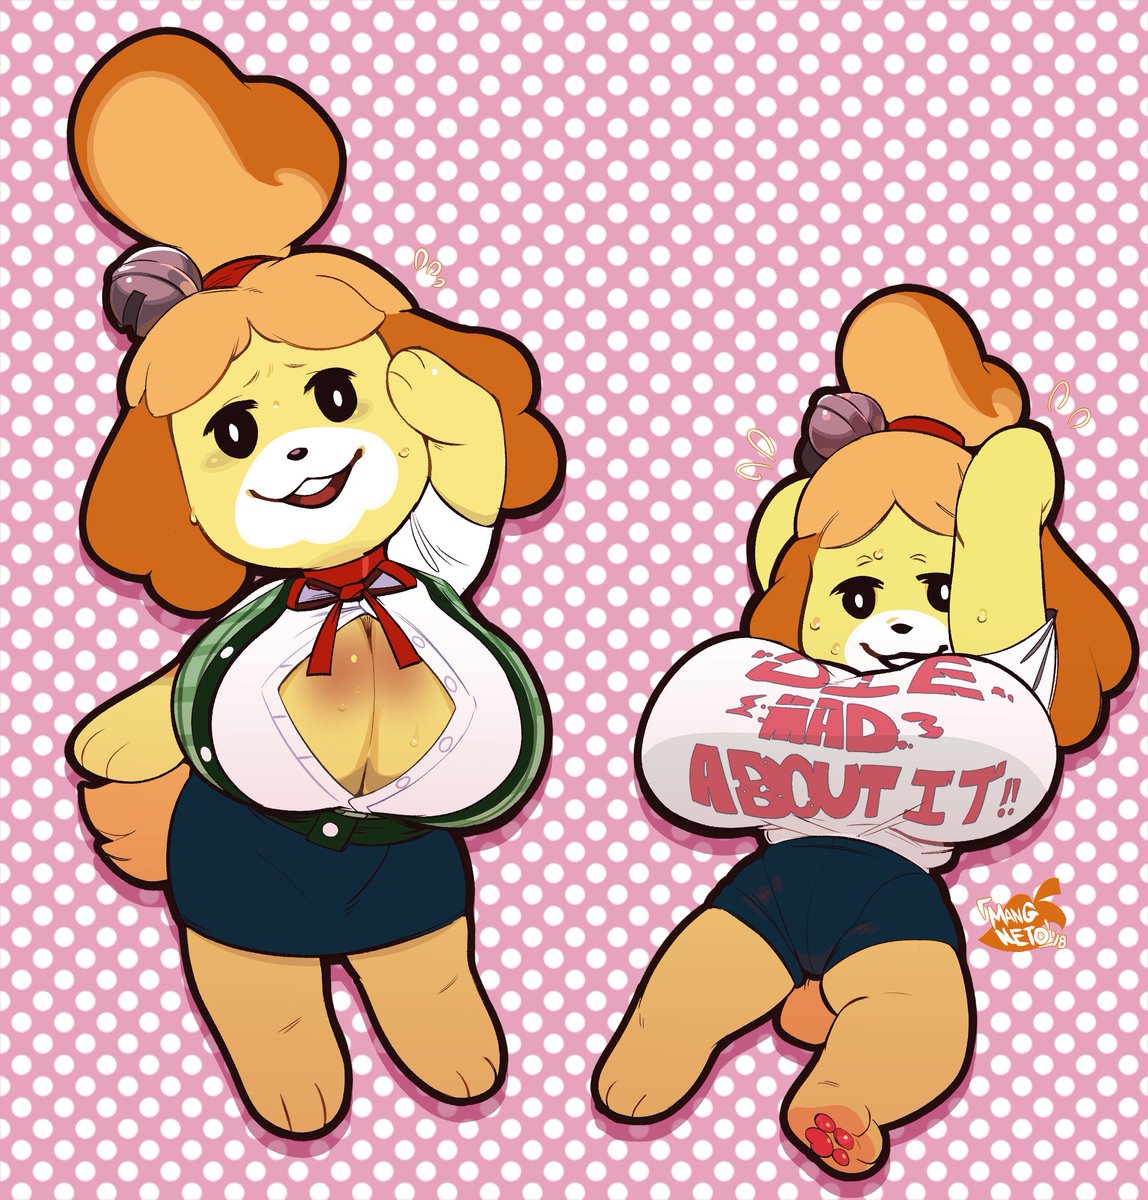 Isabelle Commission done by @MNGNTO.